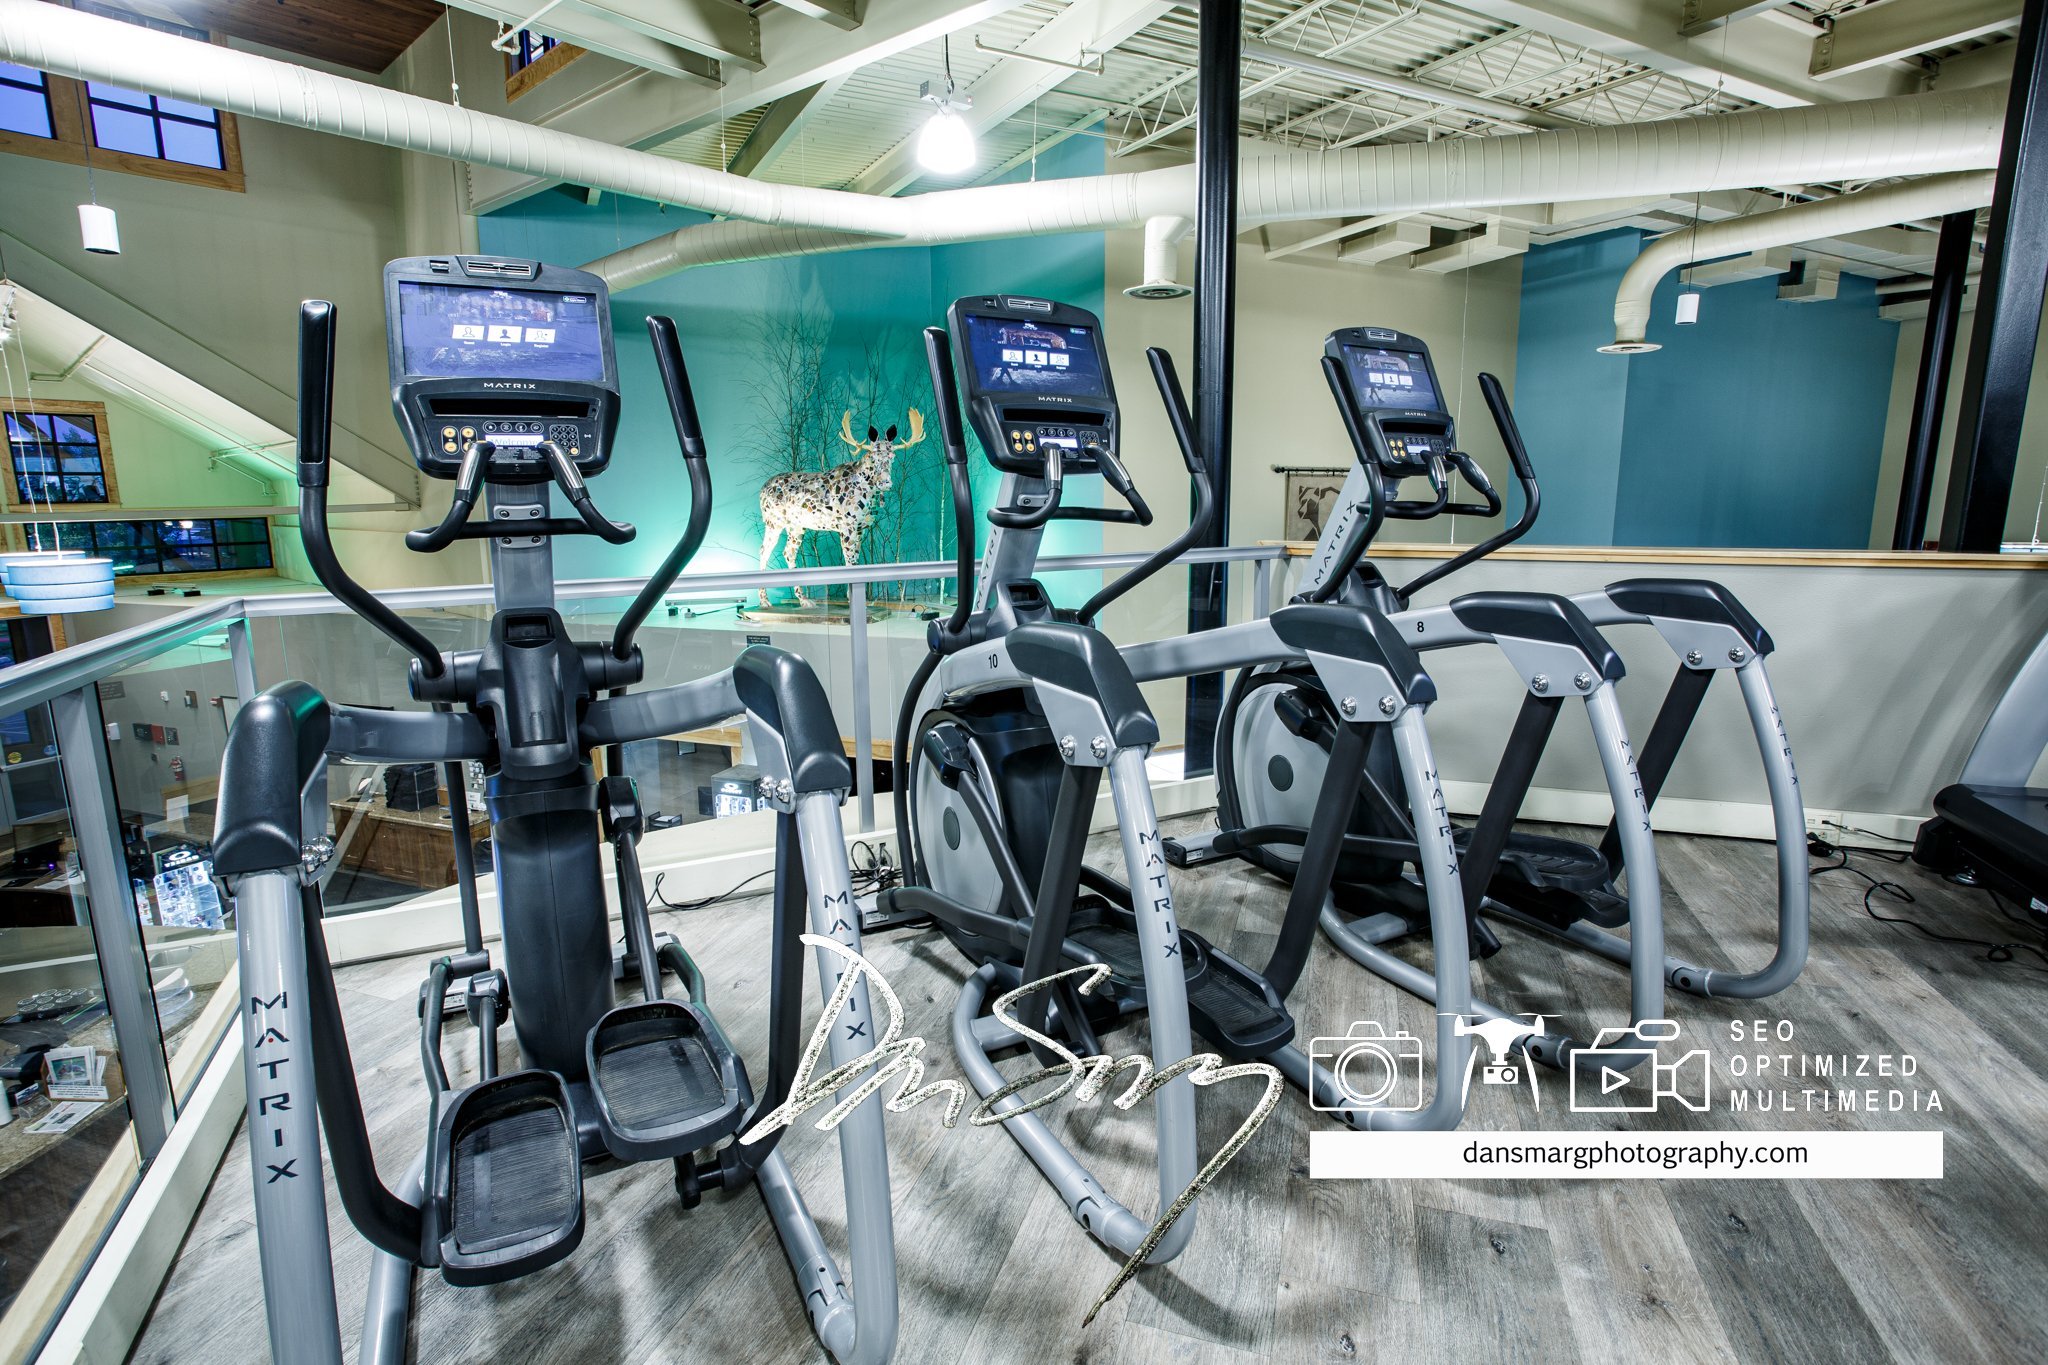 DanSmargPhotography.com-SEO-Optimmized-Multimedia-Content-The-Wave-Fitness-Center-Whitefish-Montana-06.jpg